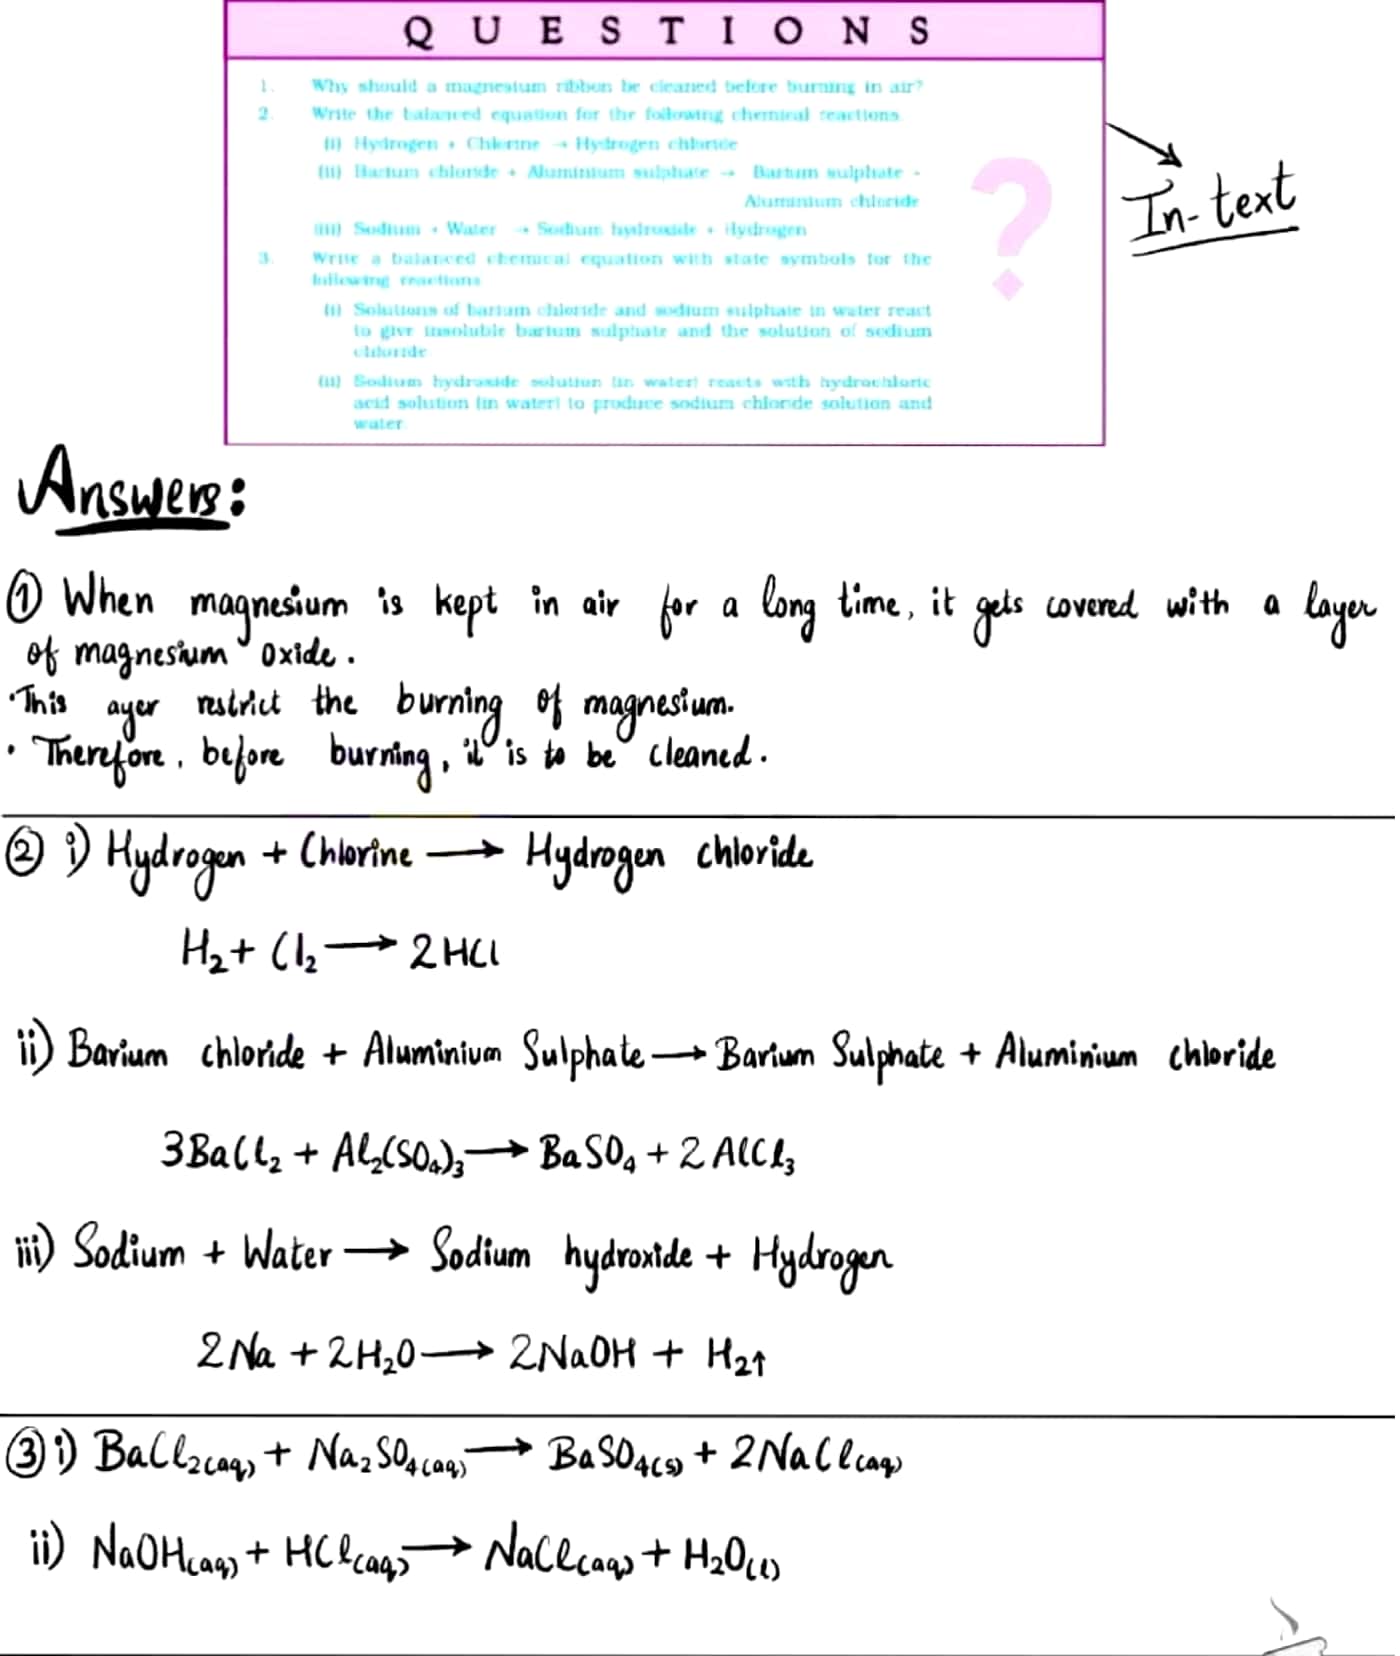 case study questions in chemical reactions and equations